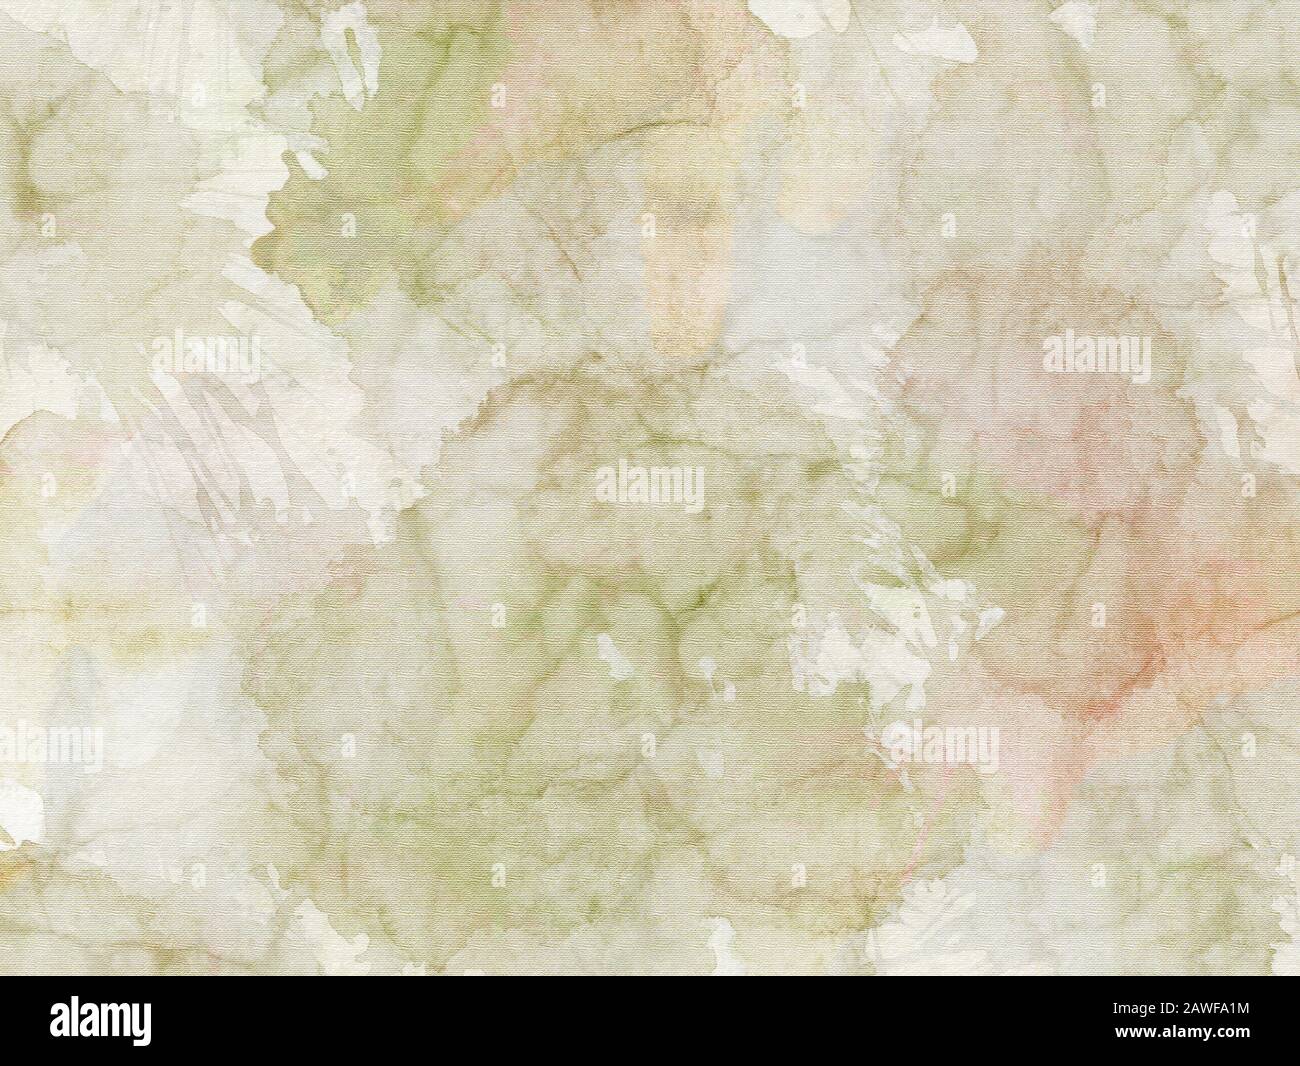 Old paper texture with irregular stains. Monochromatic background. Stock Photo